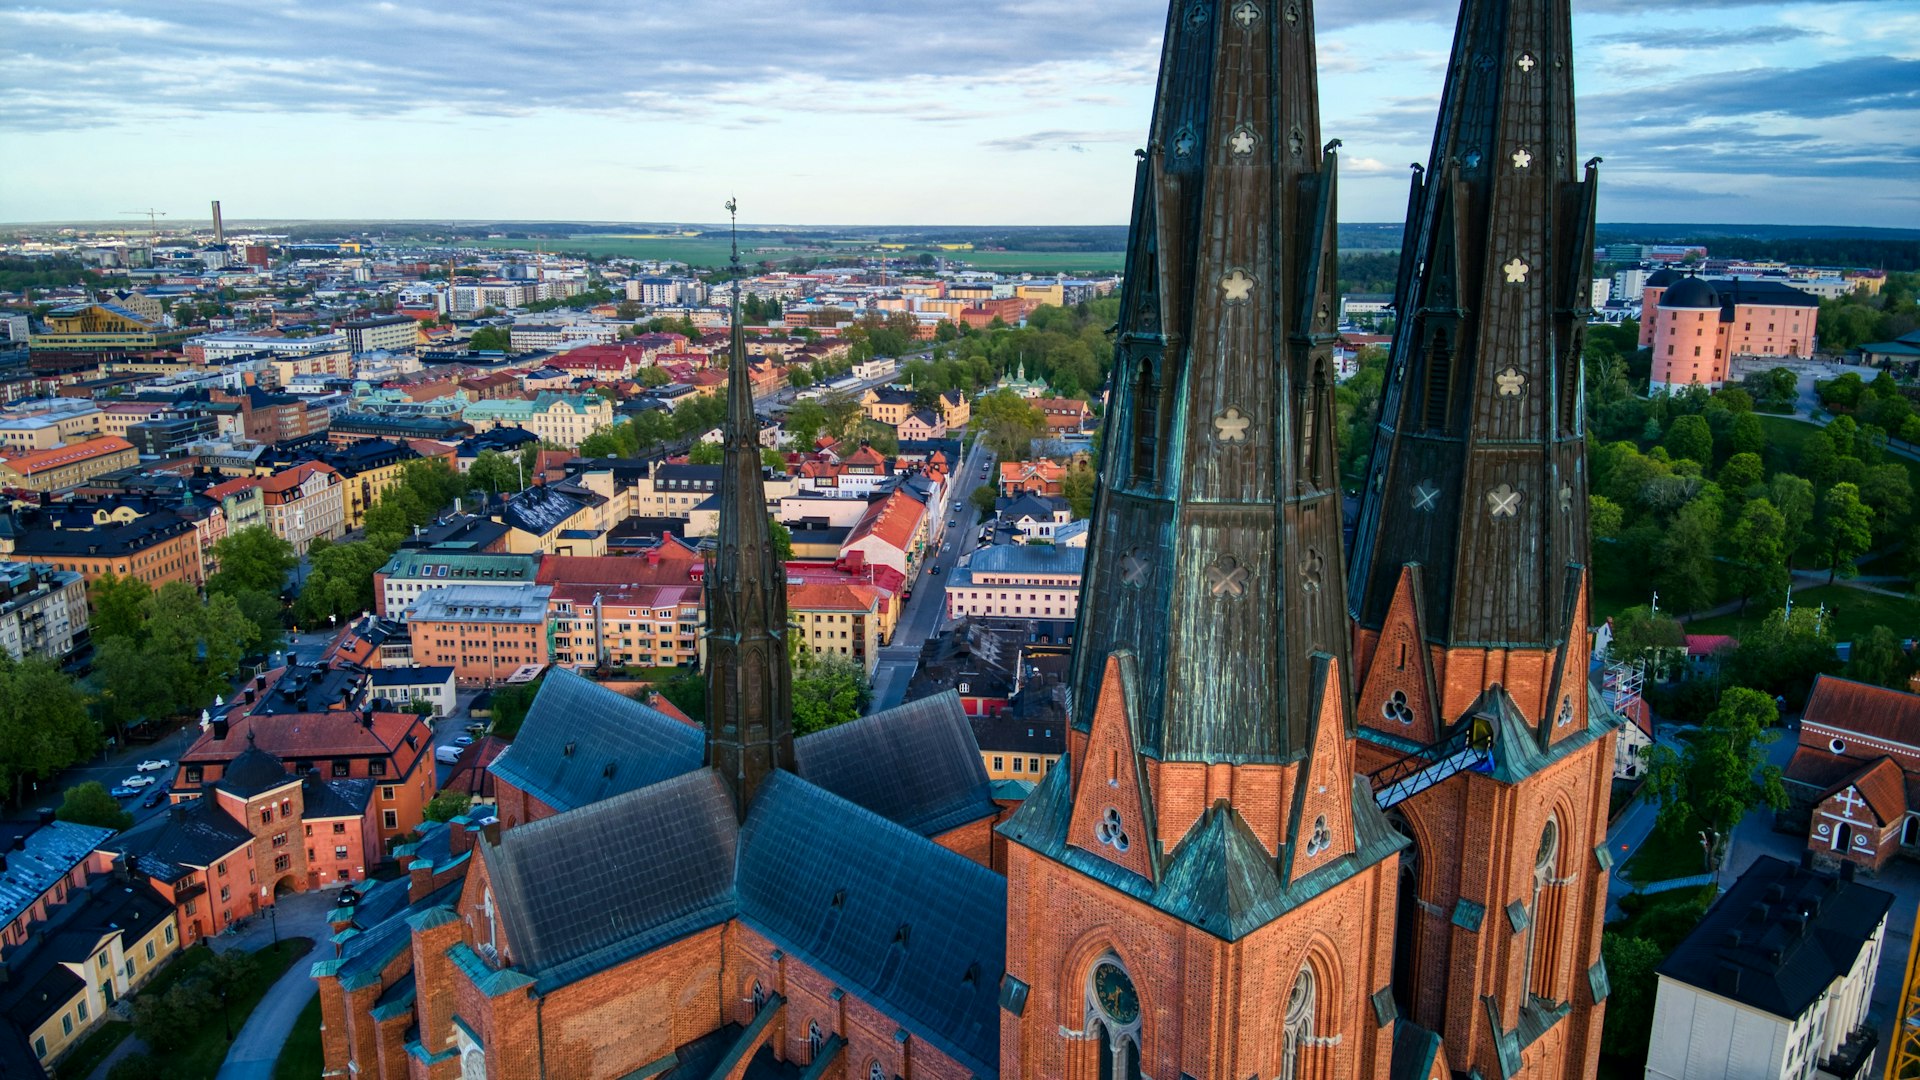 A shot taken near the steeples of a large church looking down over city roofs